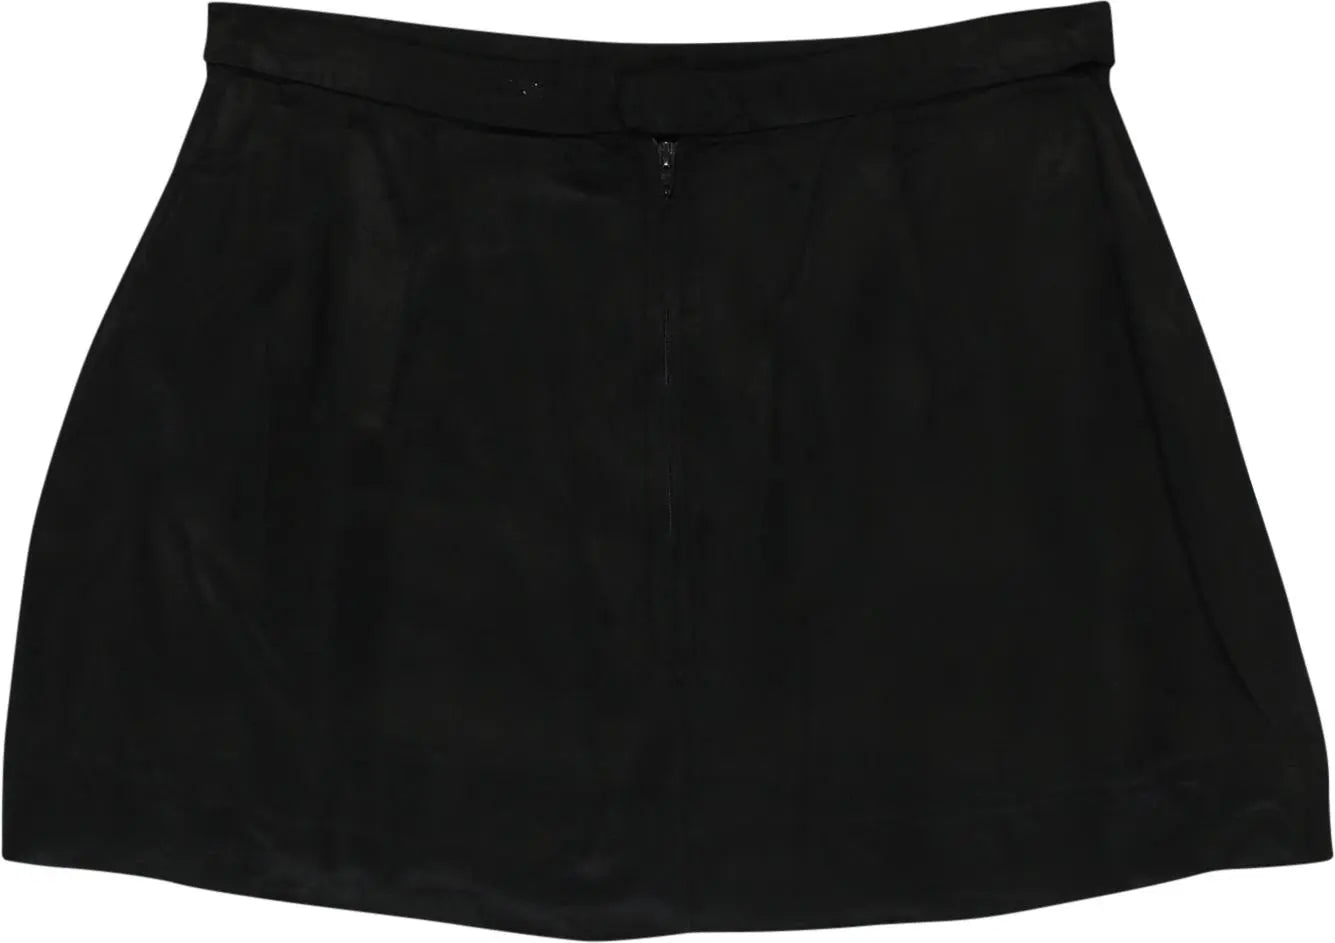 Unknown - Black Skirt- ThriftTale.com - Vintage and second handclothing